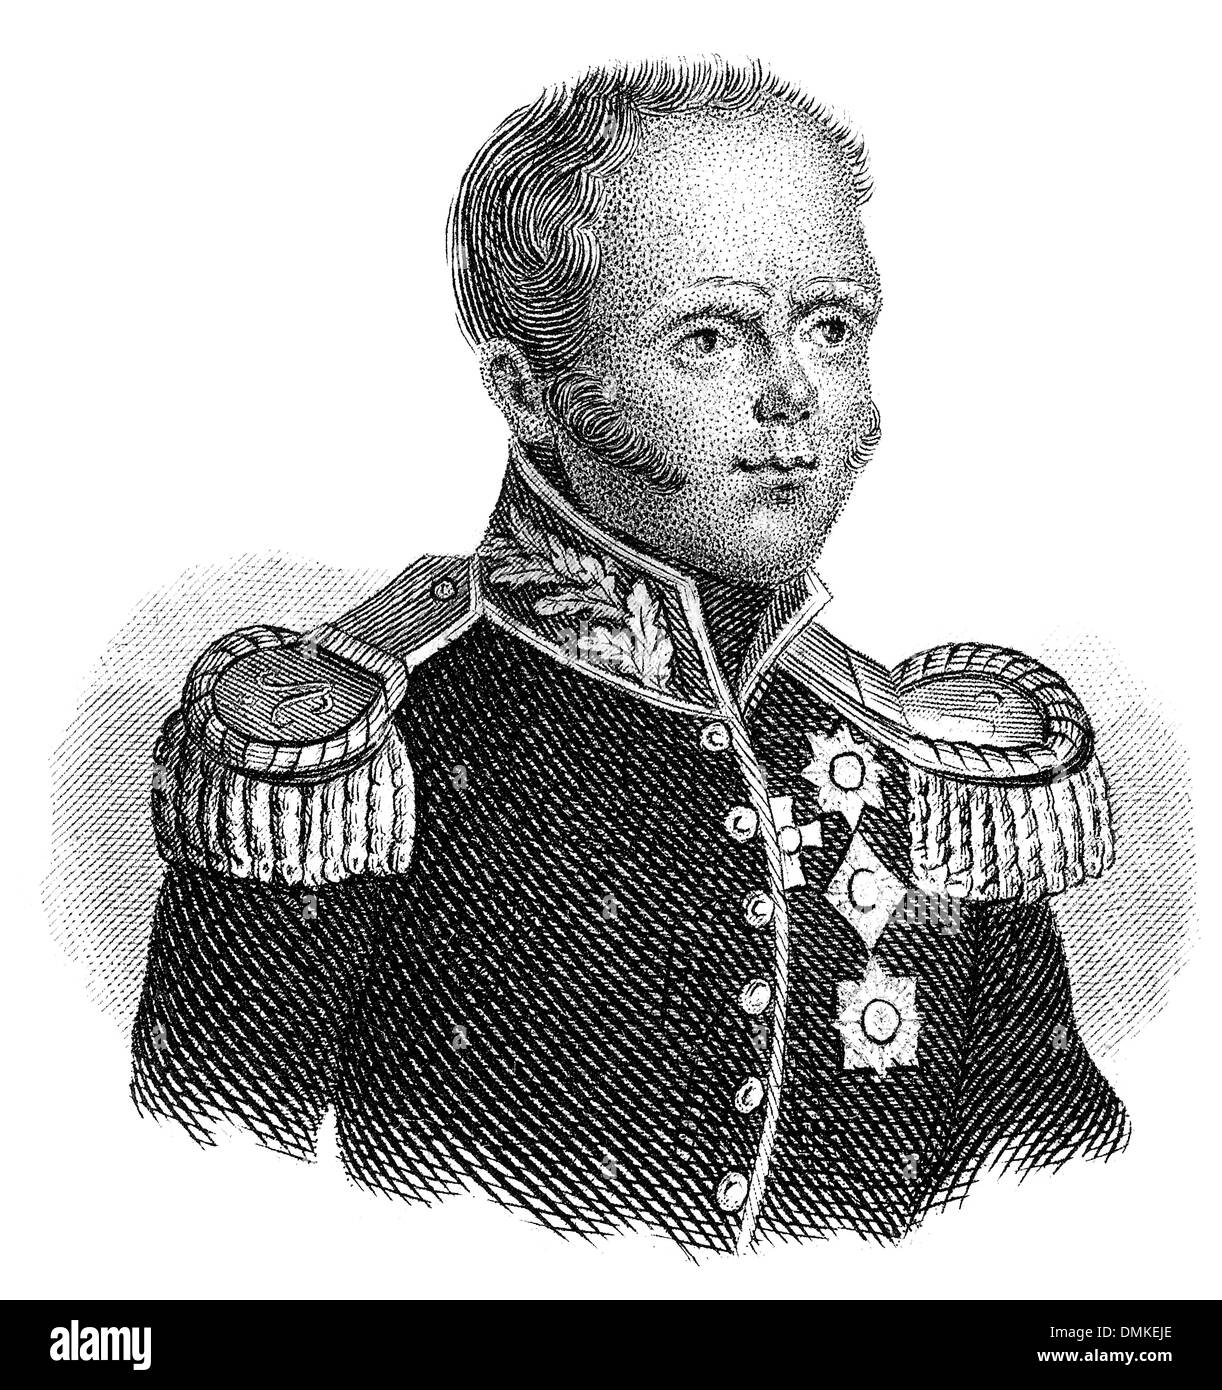 Constantine Pavlovich, 1779 - 1831, grand duke of Russia, His Imperial Majesty Constantine I Emperor and Autocrat of All the Rus Stock Photo